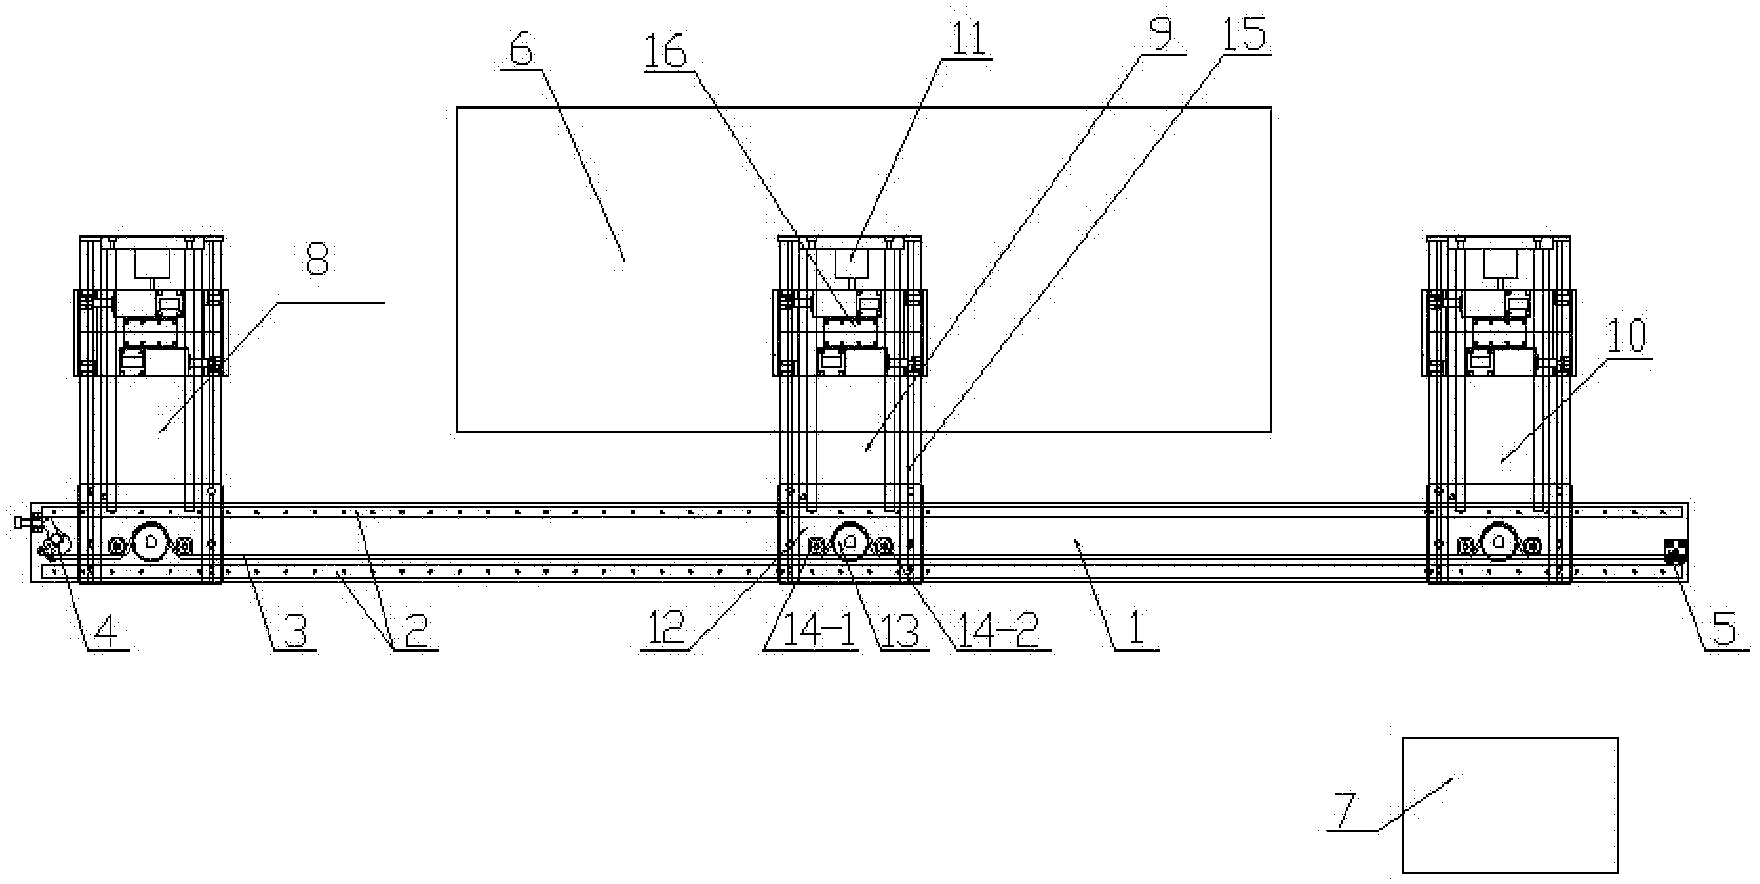 Industrial manipulator applicable to automatic arrangement and welding of solar photovoltaic cell